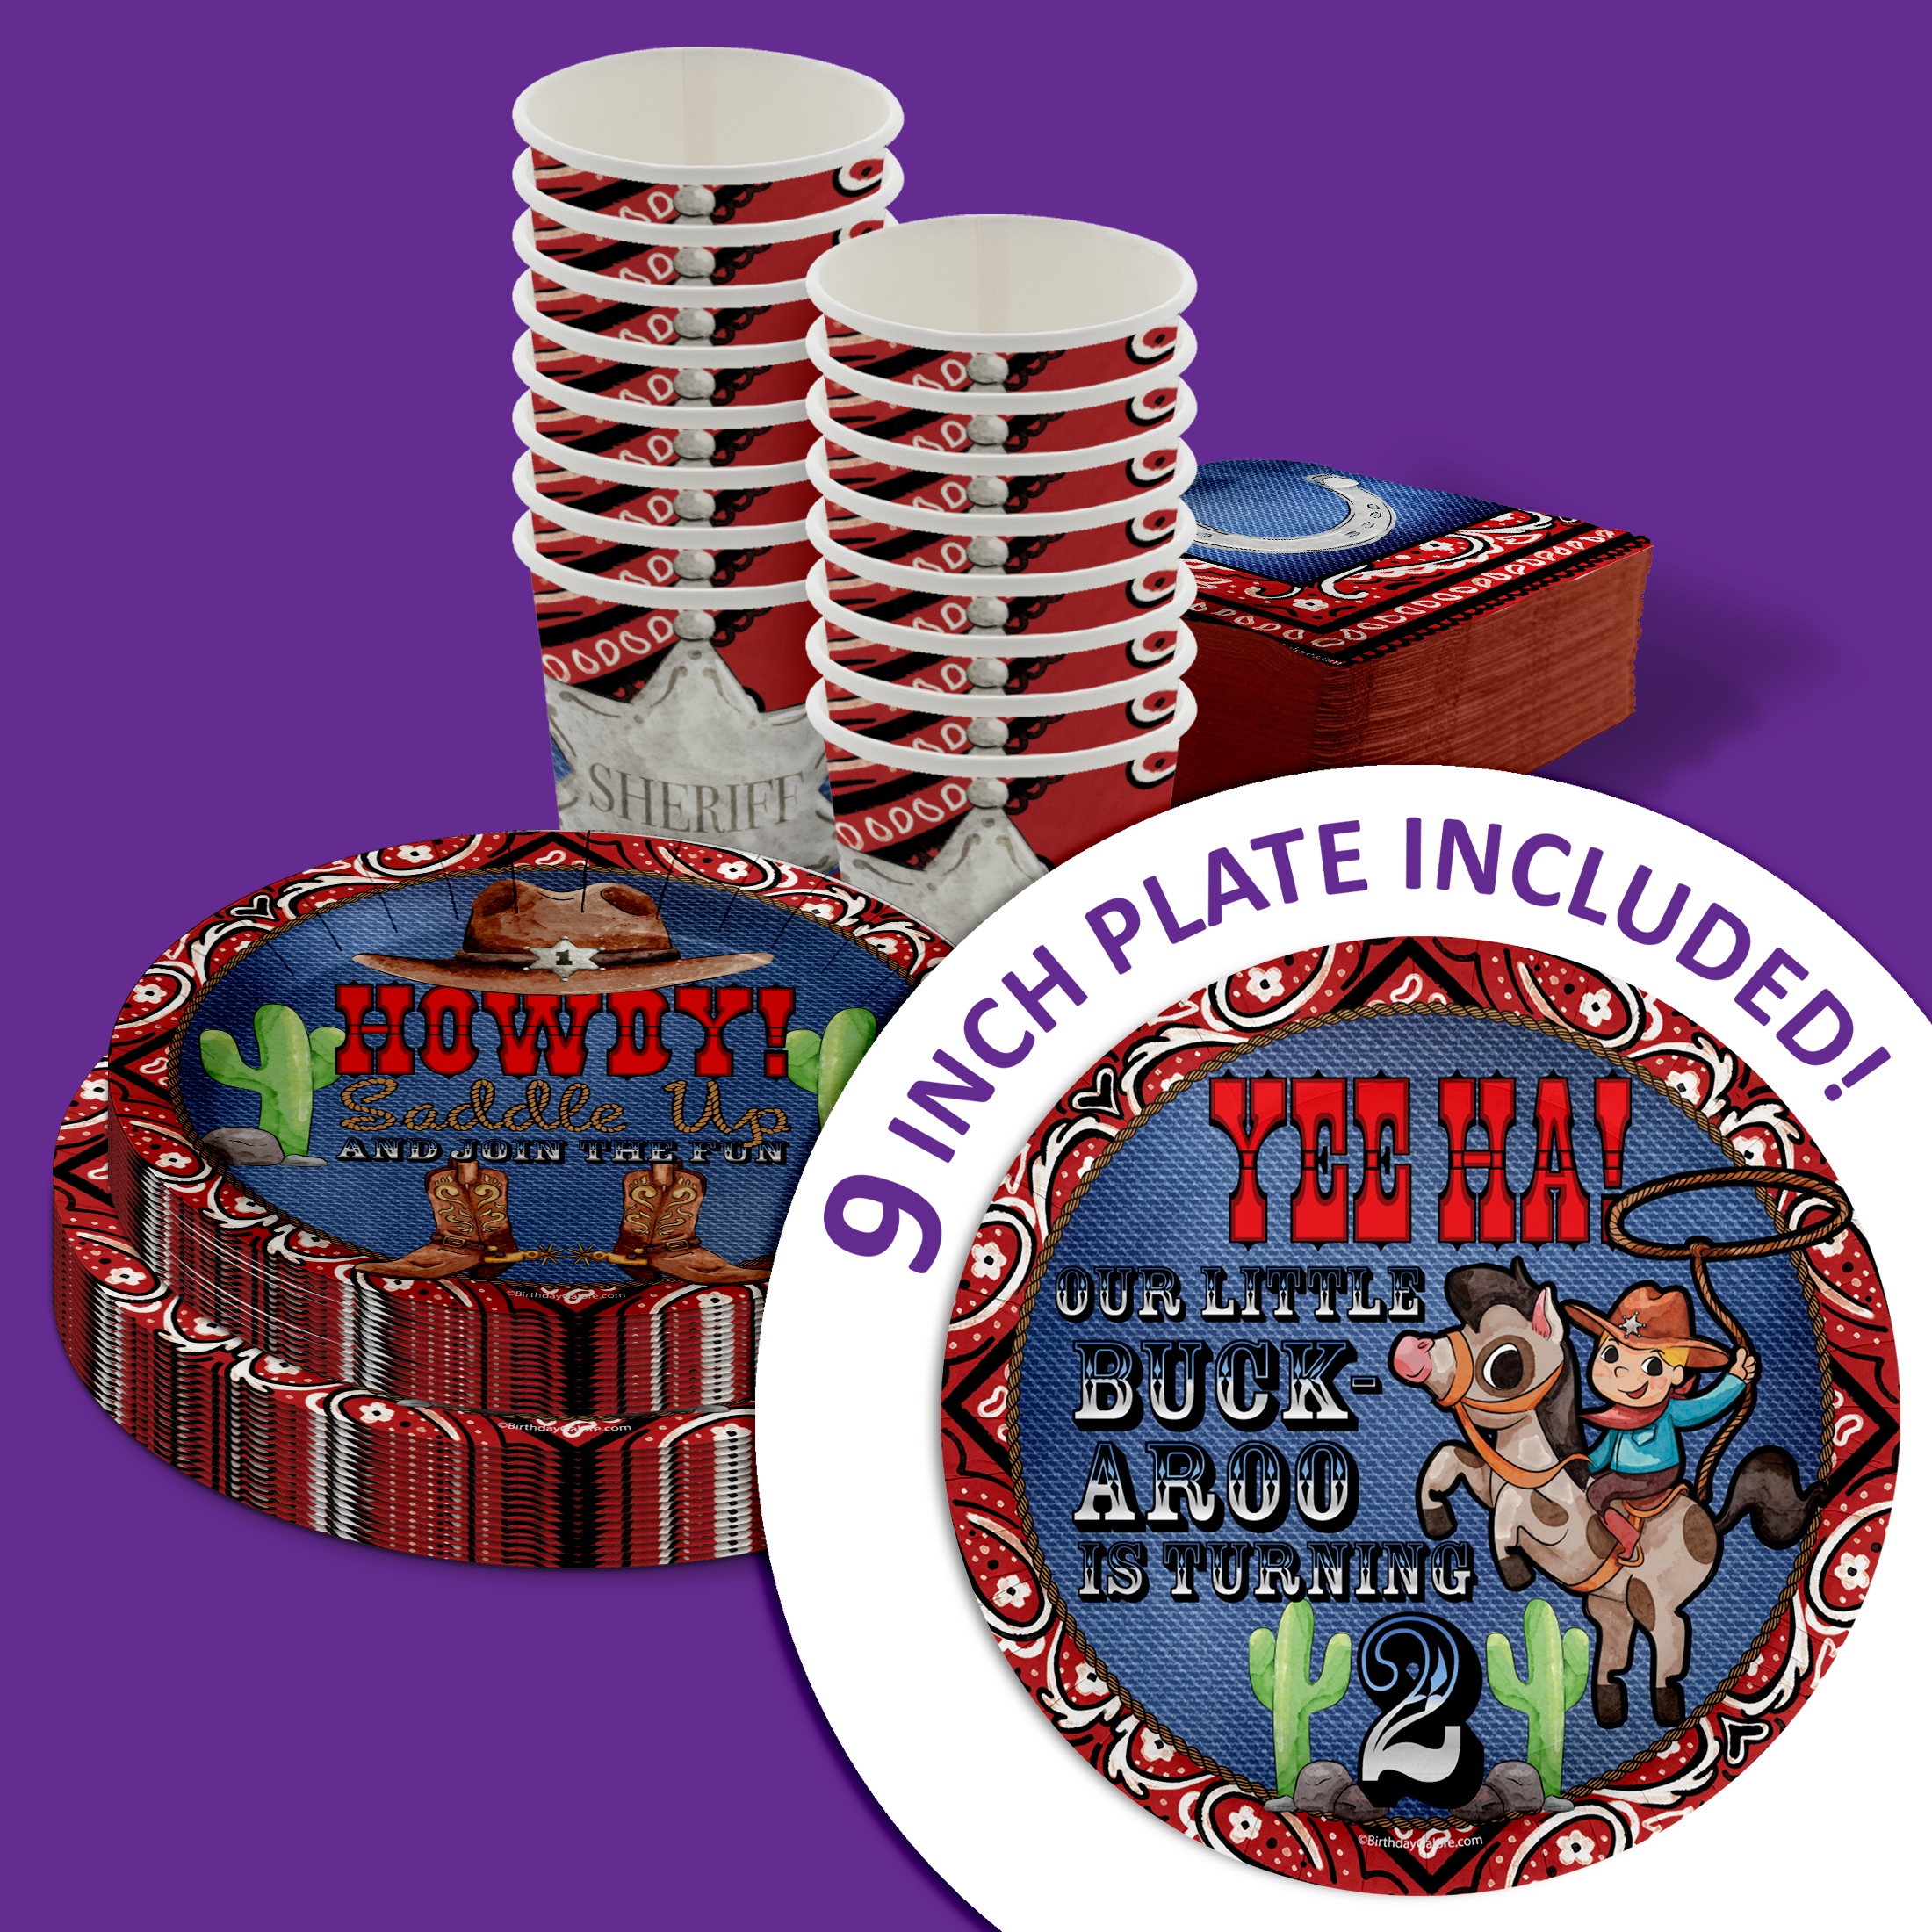 Our Little Buckaroo is Turning Two 2nd Birthday Party Supplies 64 Piece Tableware Set Includes Large 9" Paper Plates Dessert Plates, Cups and Napkins Kit for 16